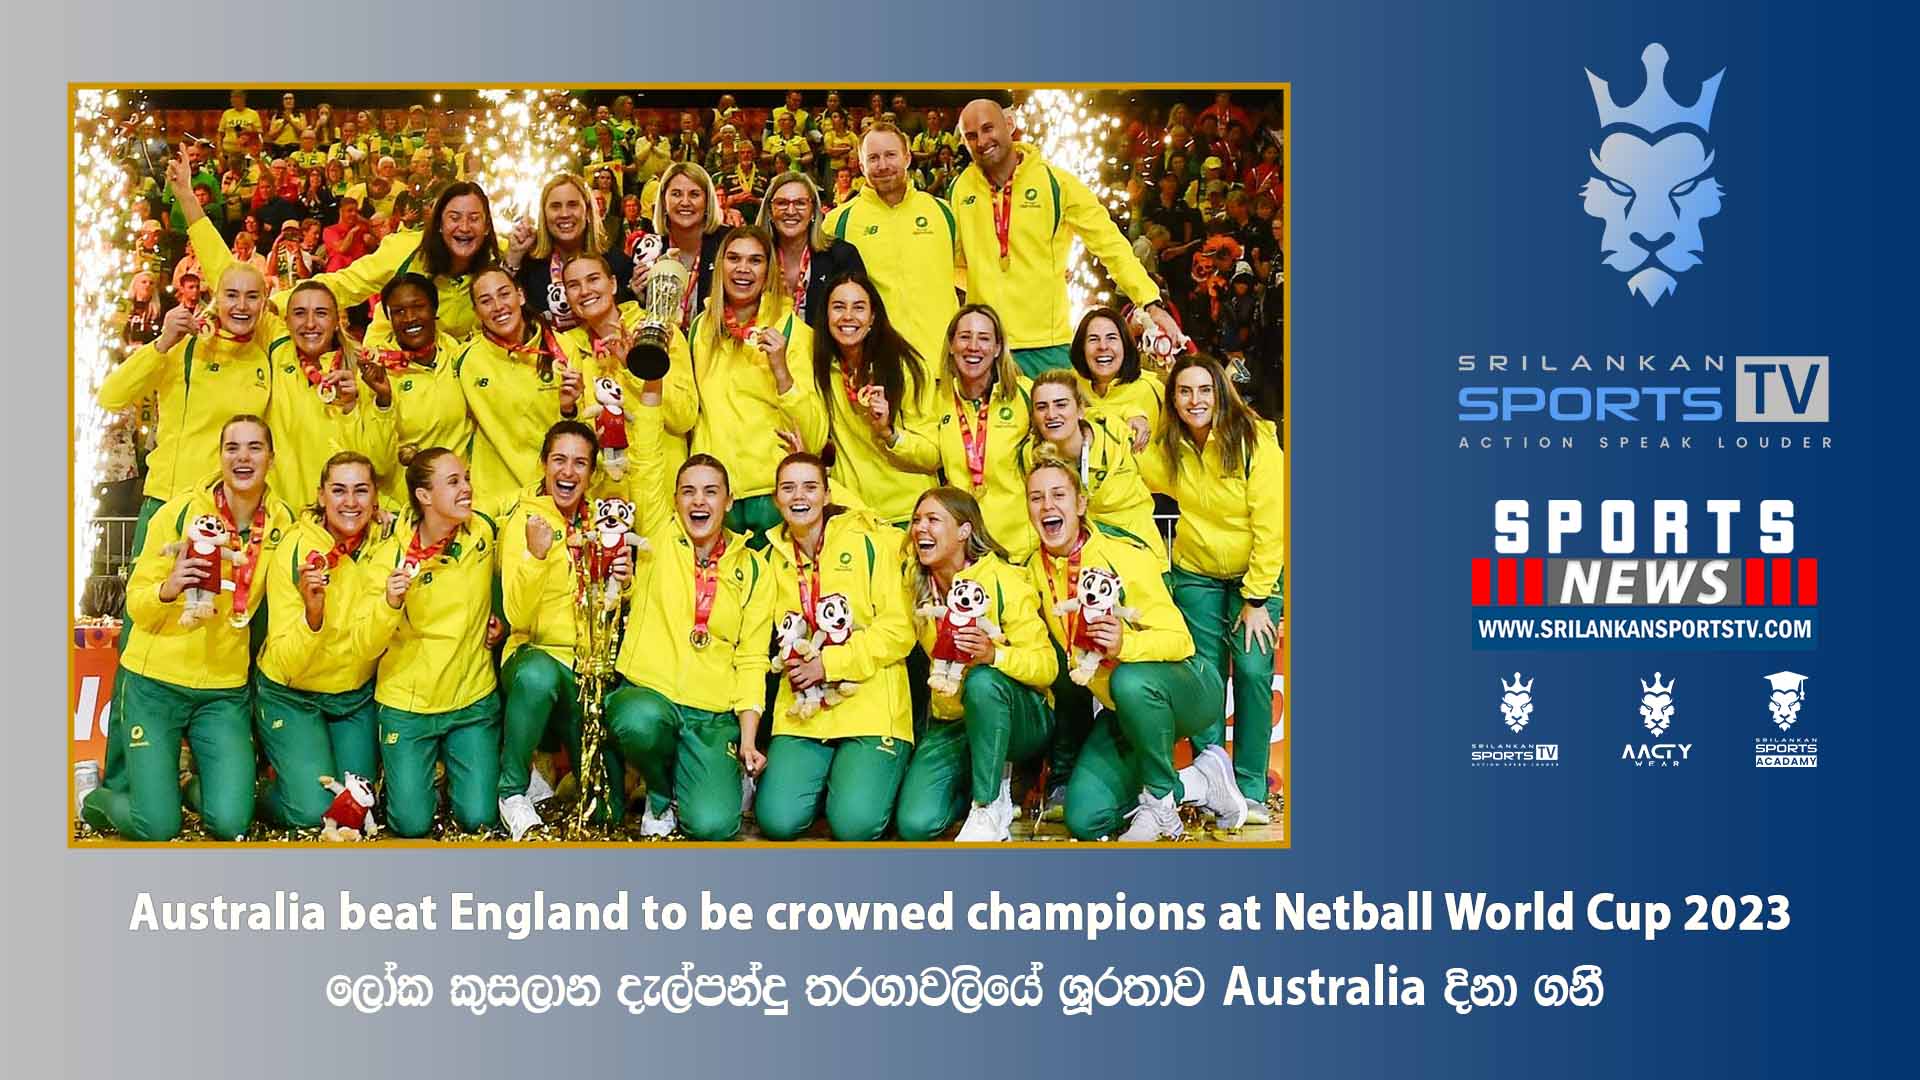 Australia beat England to be crowned champions at Netball World Cup 2023